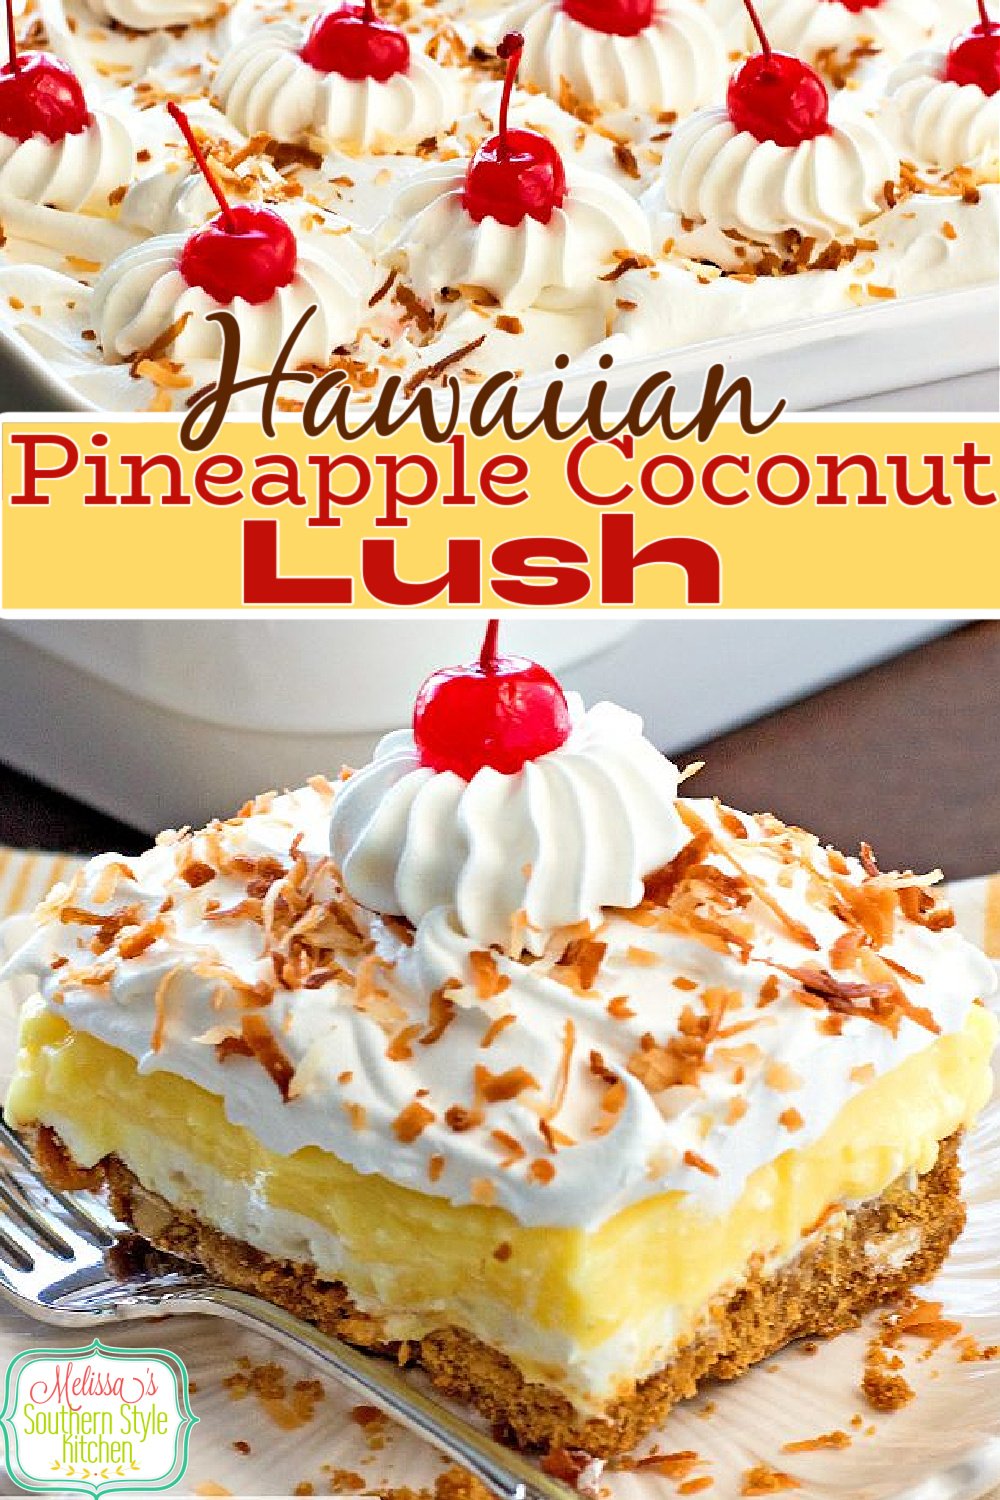 This island inspired Hawaiian Pineapple Coconut Lush is a winner every time it's served #hawaiianlush #pineapplelush #coconutcream #desserts #dessertfoodrecipes #southernrecipes #southernfood #bbqdesserts #spring #easterdesserts #melissassouthernstylekitchen via @melissasssk